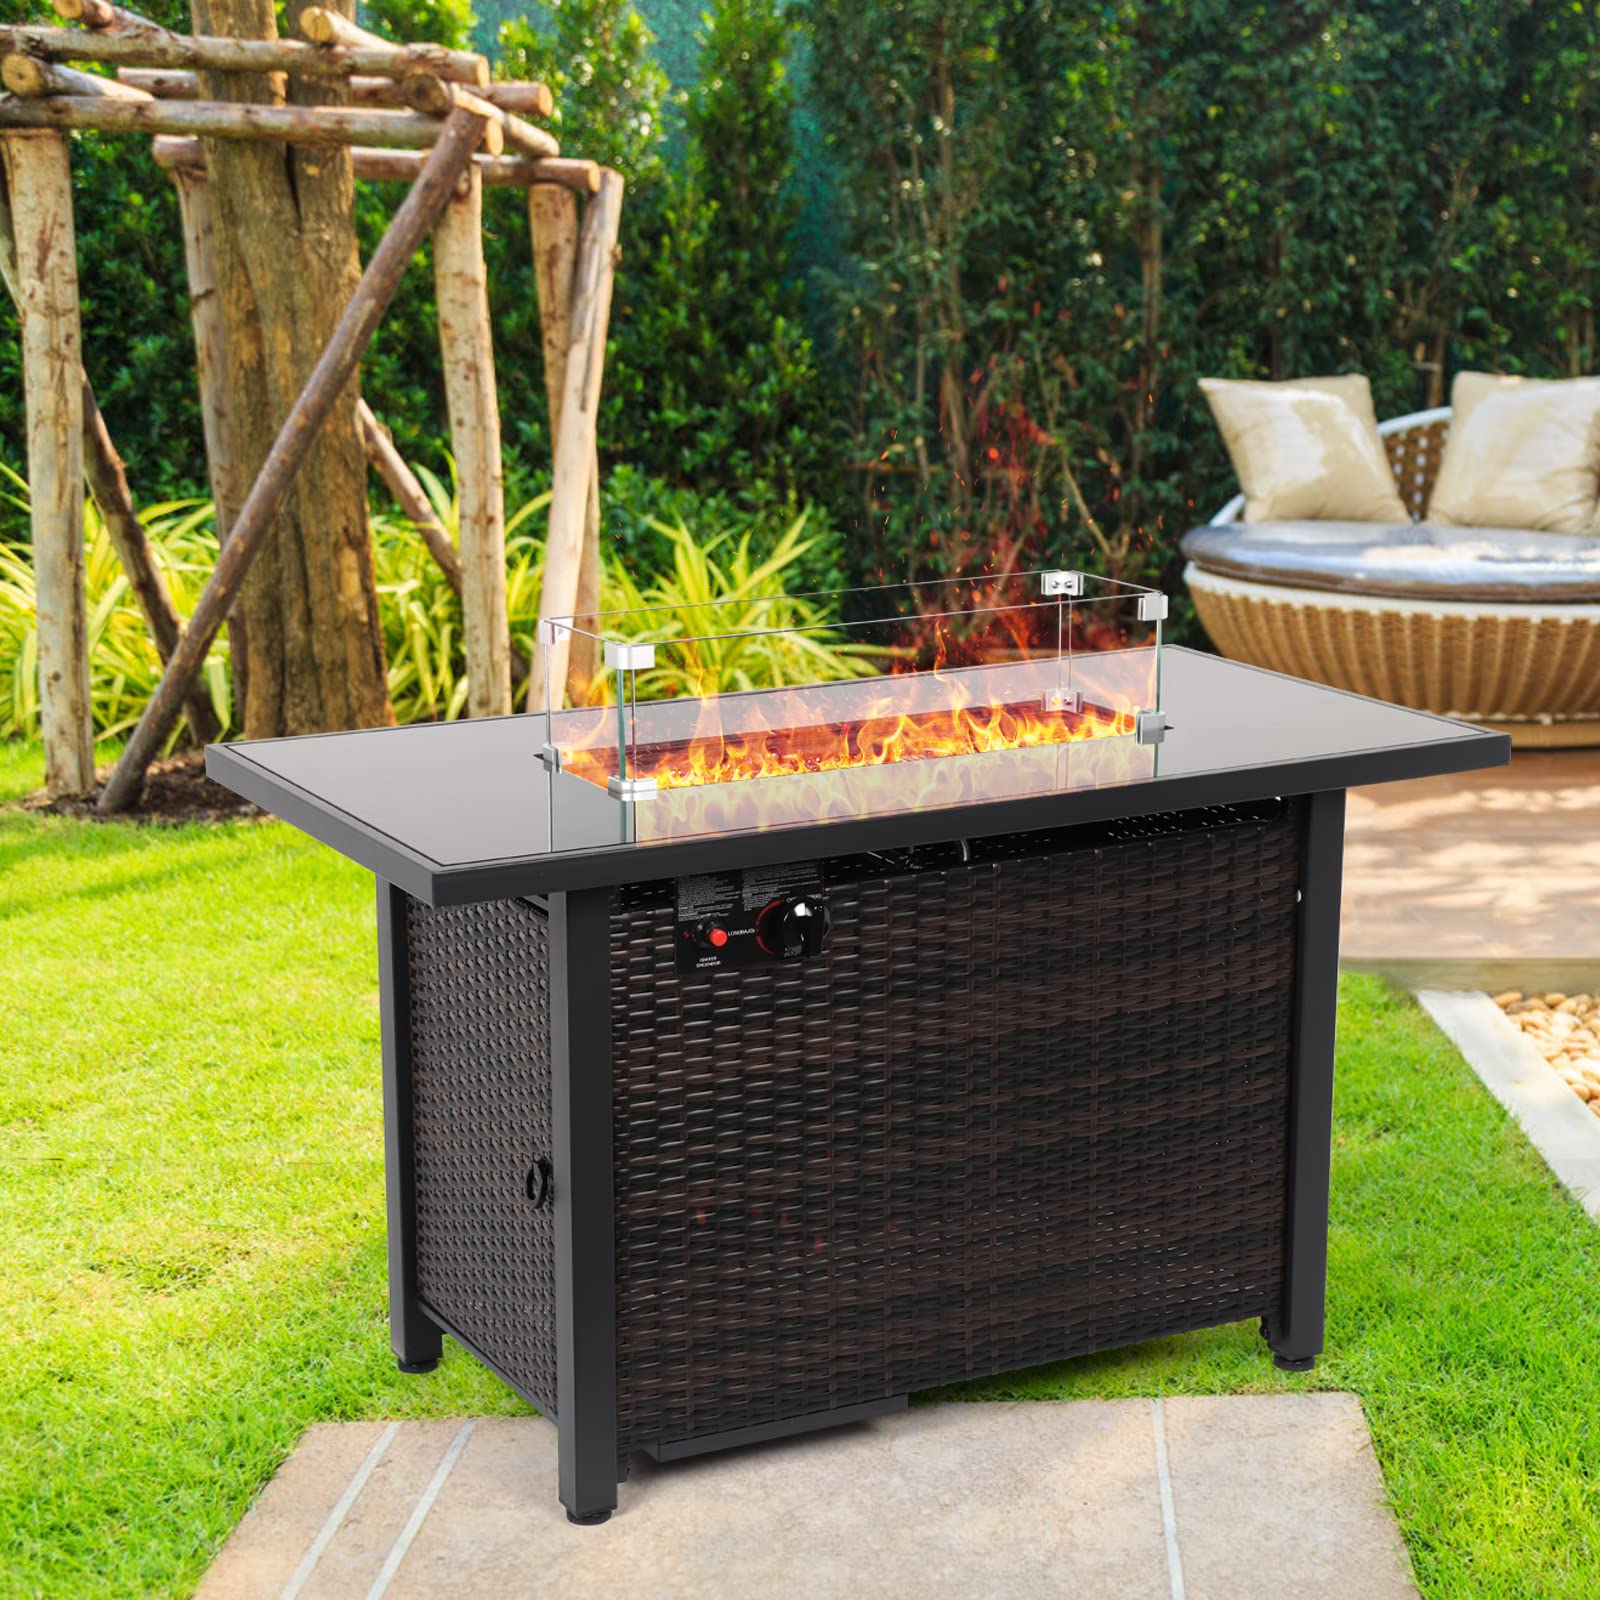 44 in Propane Fire Pit Table,Rattan Fire Pit Table with Glass Wind Guard,60,000 BTU Auto-Ignition Gas Firepit,CSA Certification and Black Tempered Glass Tabletop,for Outdoor, Patio, Lawn…